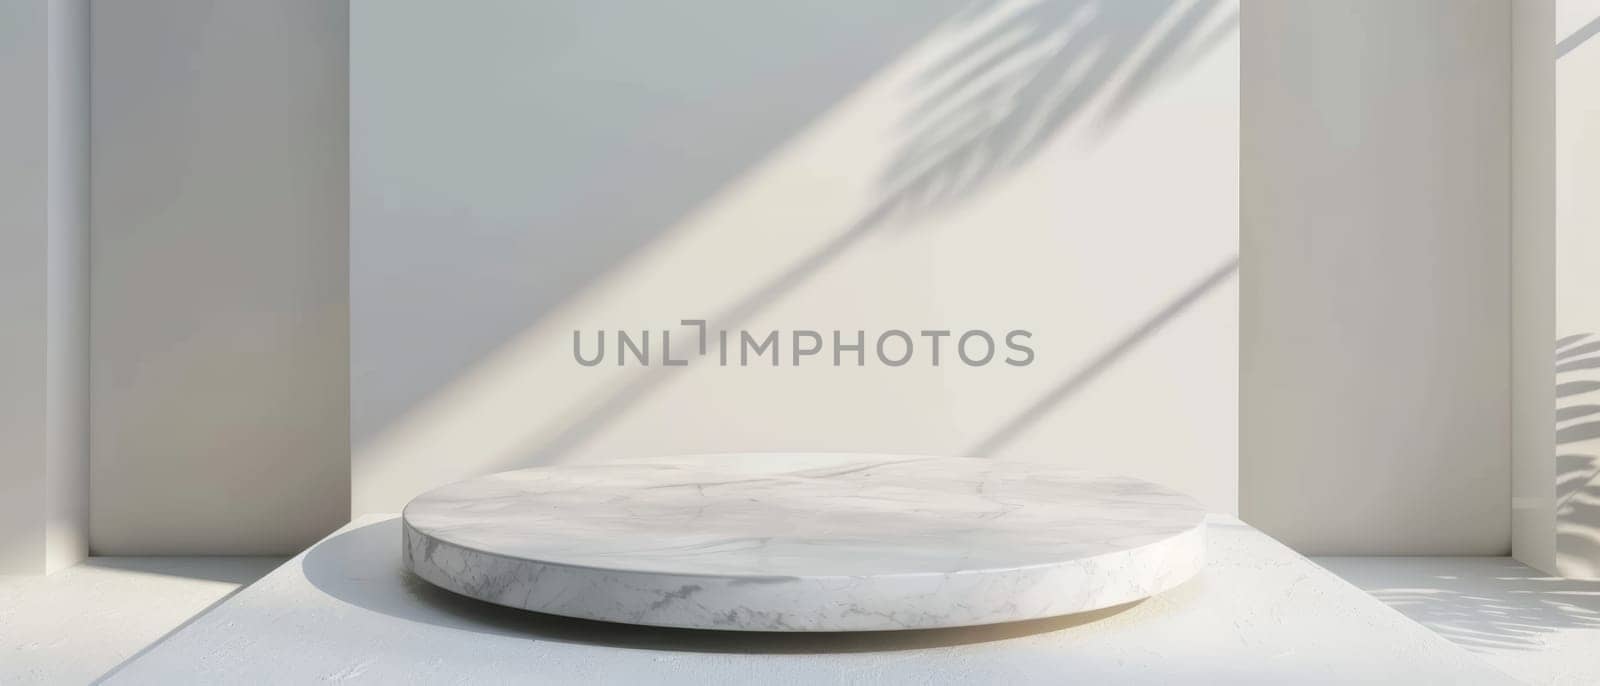 A sleek, minimalist podium made of white marble stands in a bright, airy studio, providing an elegant platform to showcase a product with natural lighting and clean lines. by sfinks